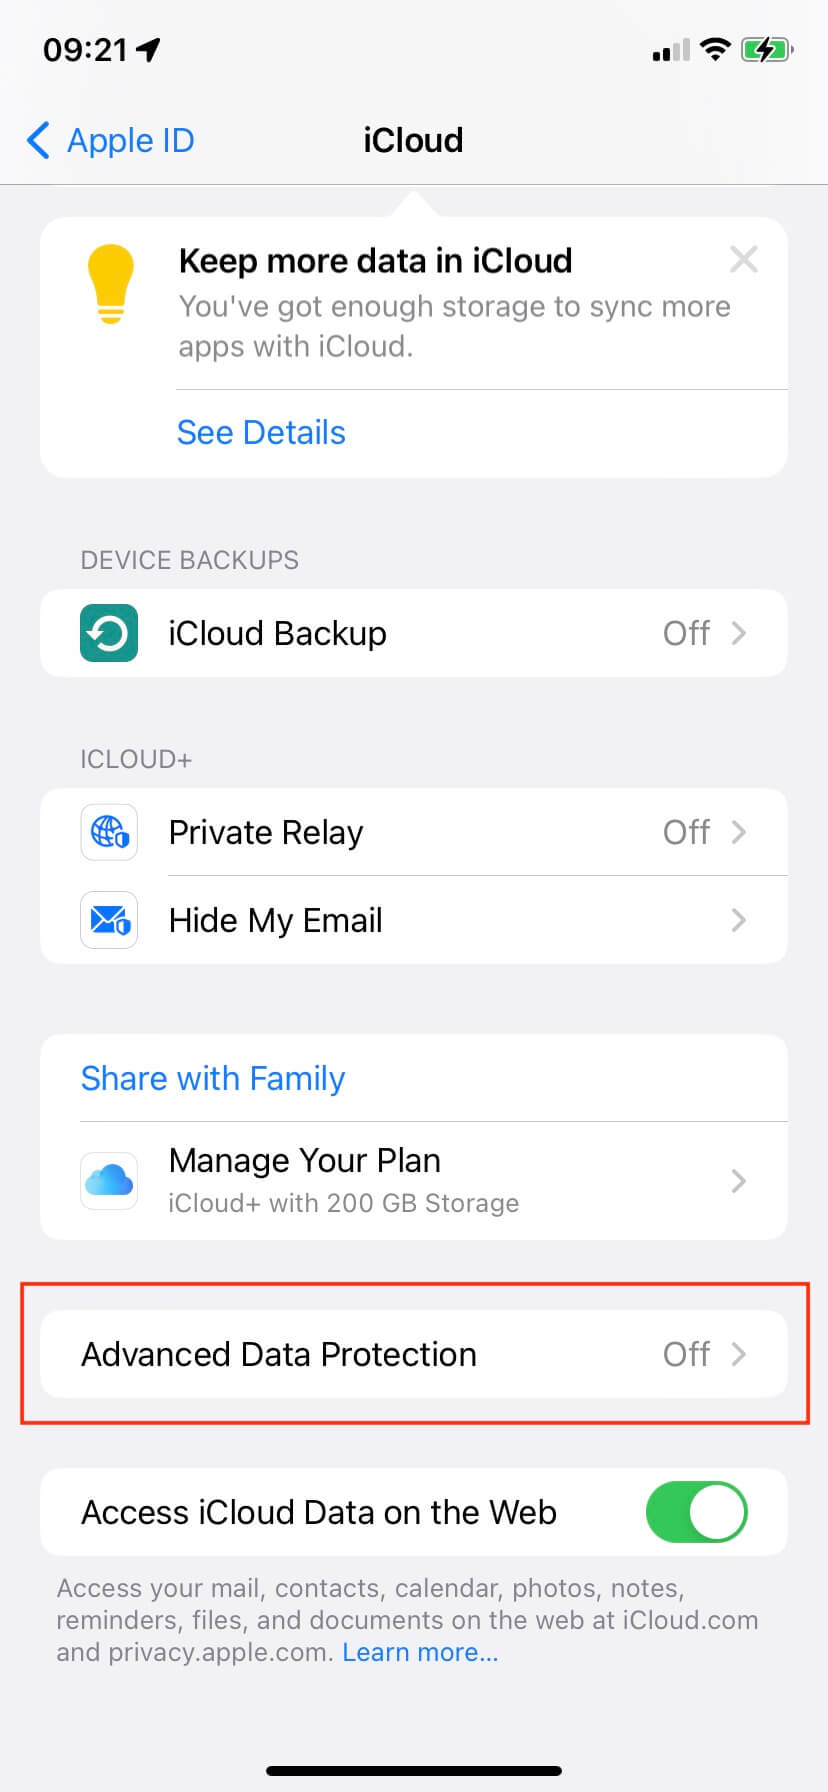 Turn on Advanced Data Protection for iCloud